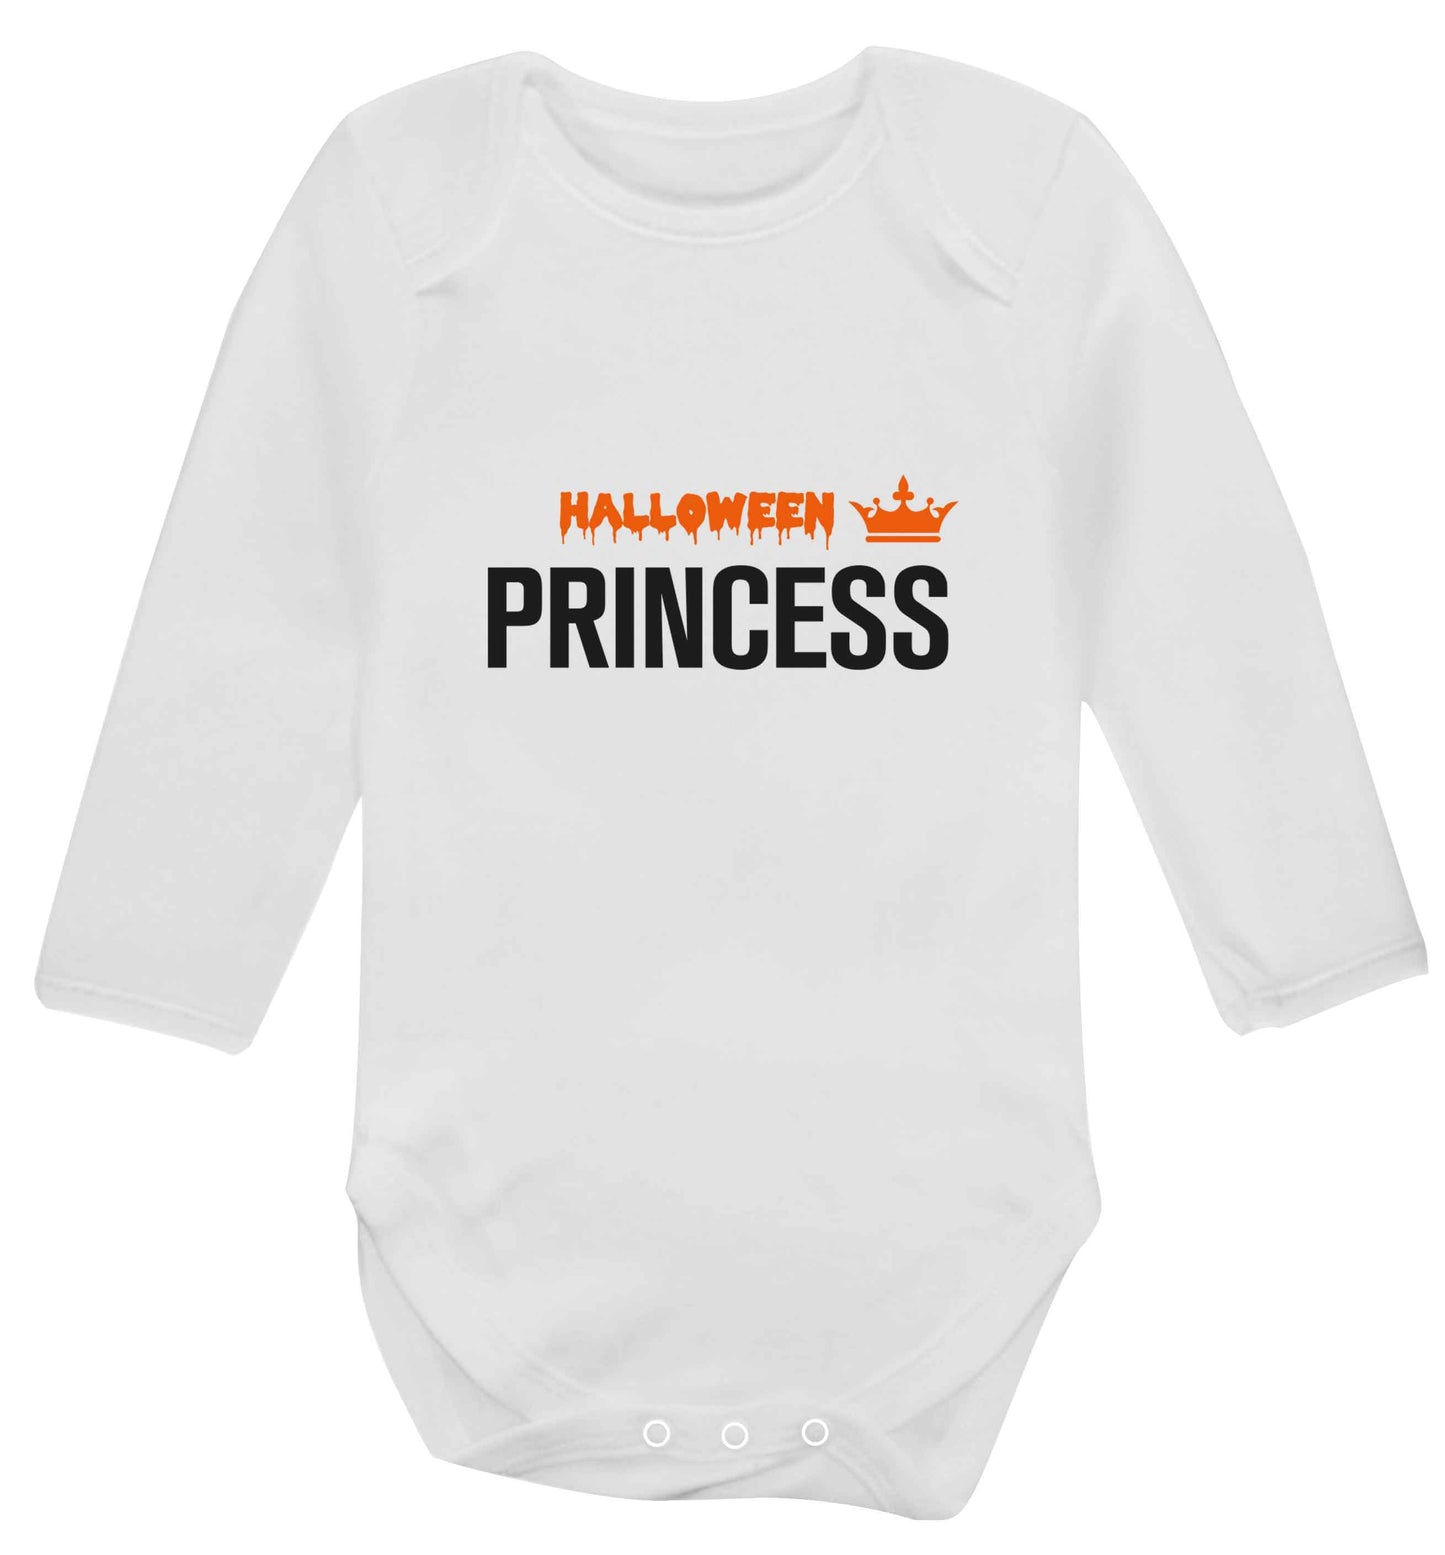 Halloween princess baby vest long sleeved white 6-12 months